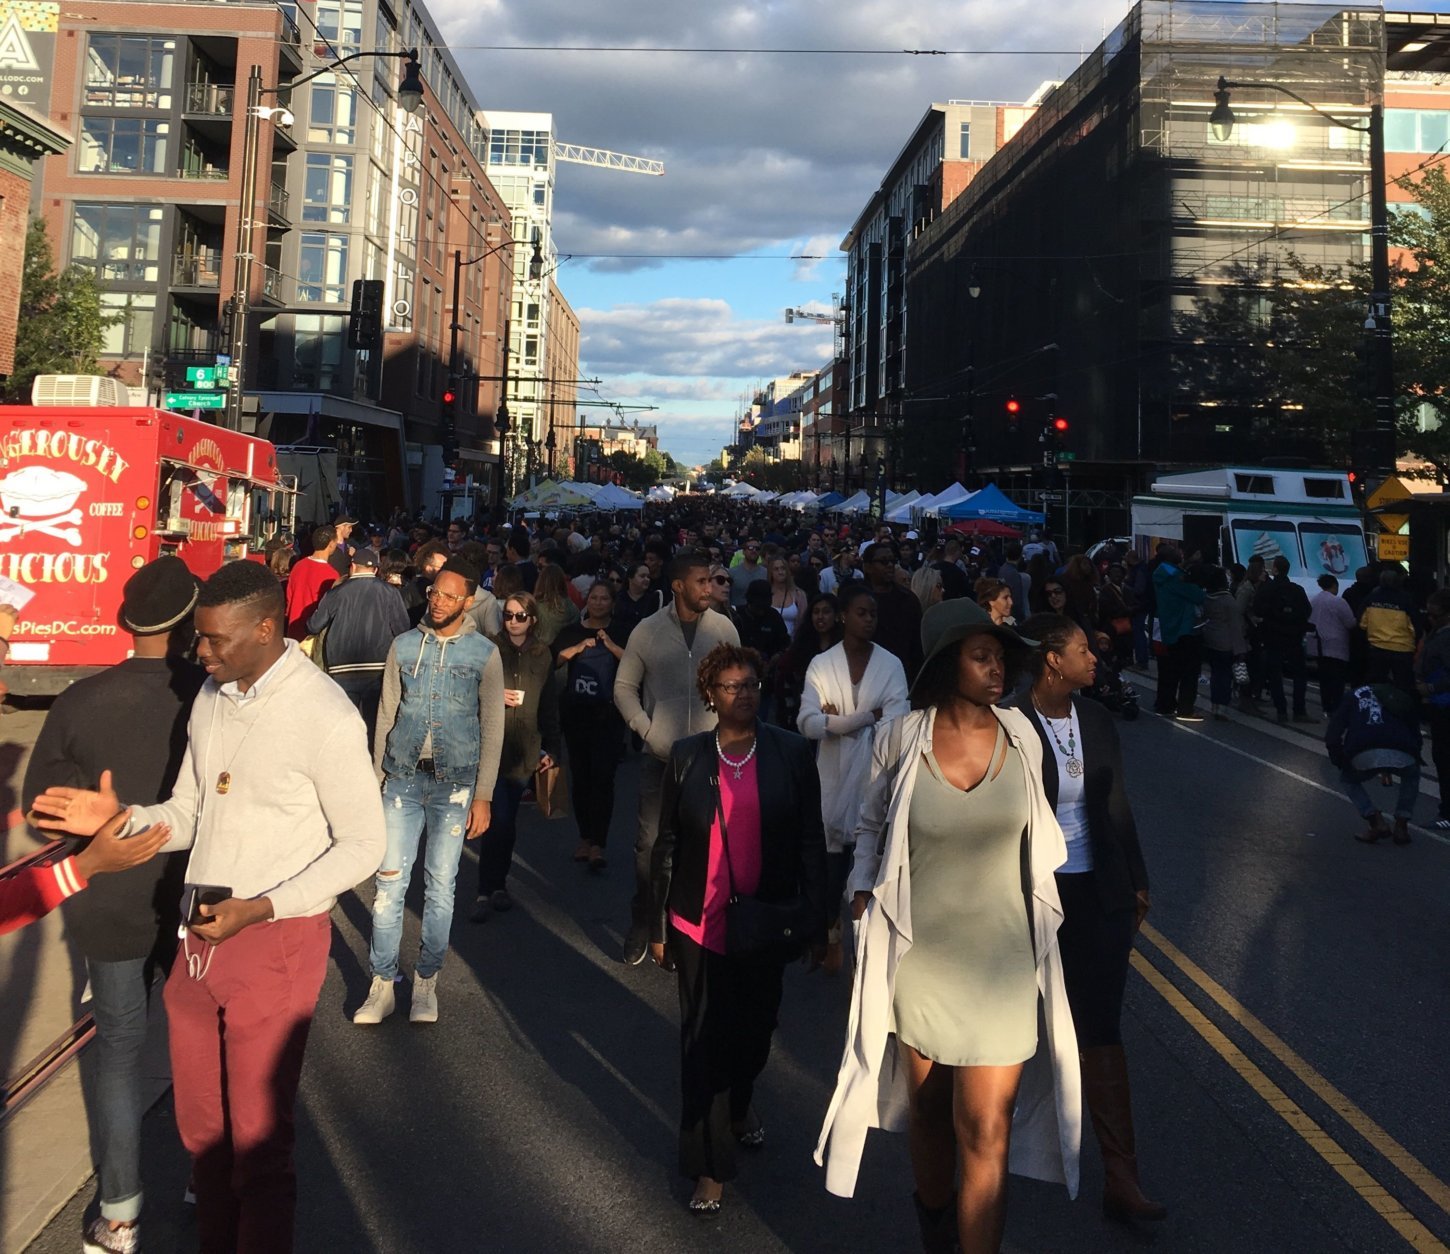 Thousands gather, stream along H Street for annual arts festival WTOP